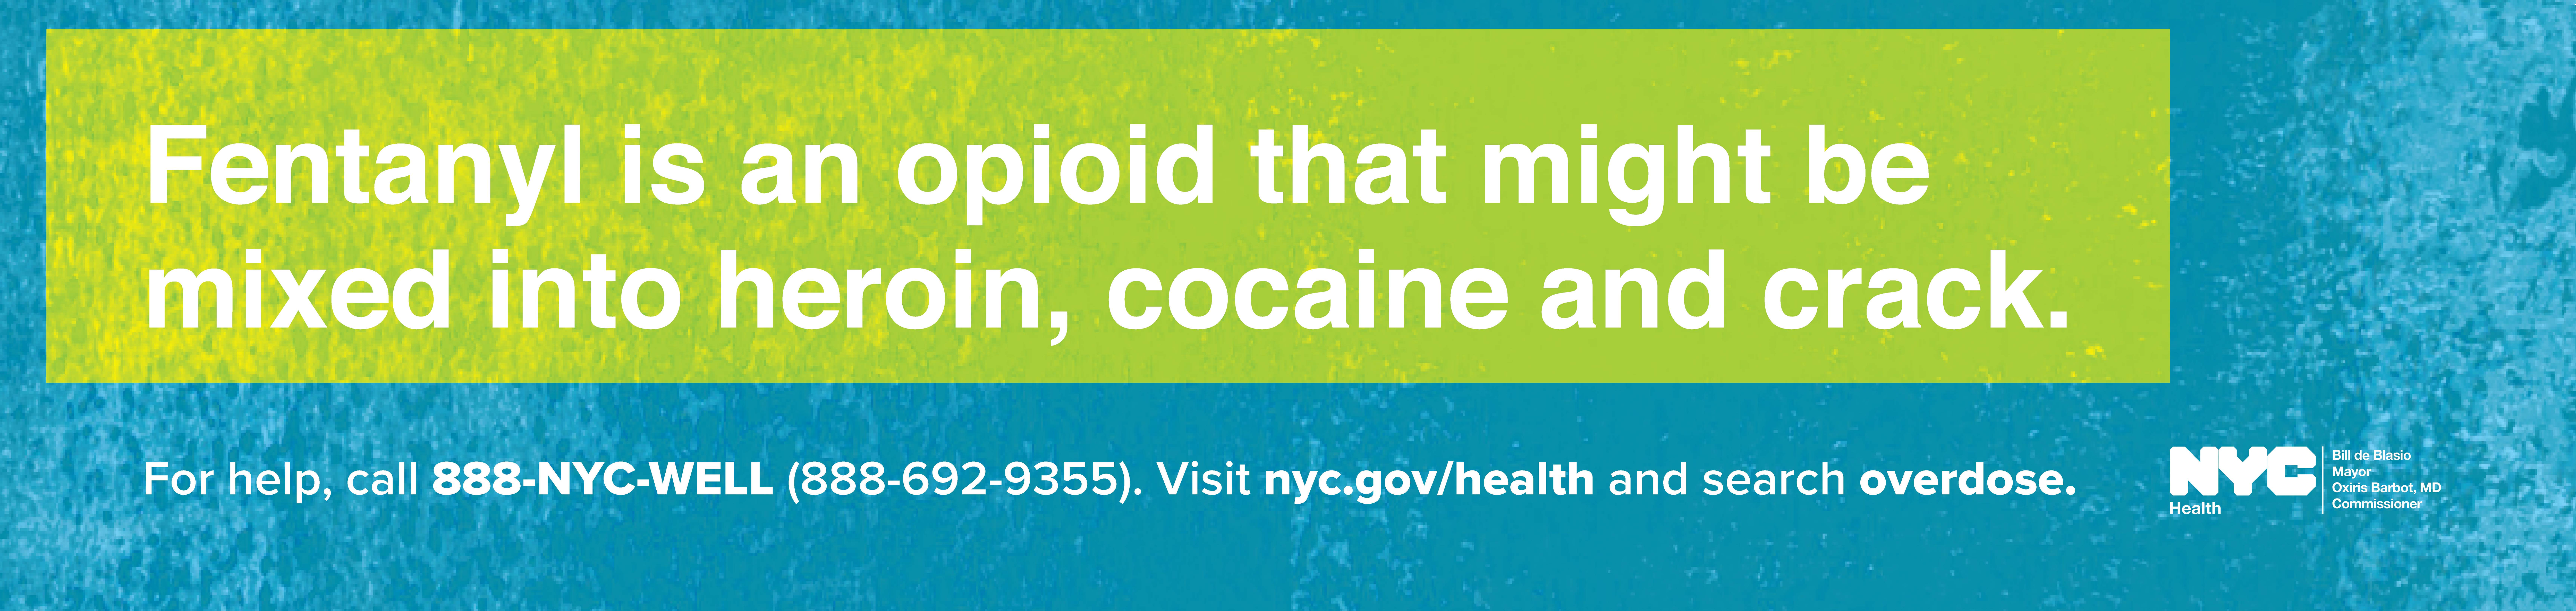 Poster with text reading 'Fentanyl is an opioid that might be mixed into heroin, cocaine and crack.'